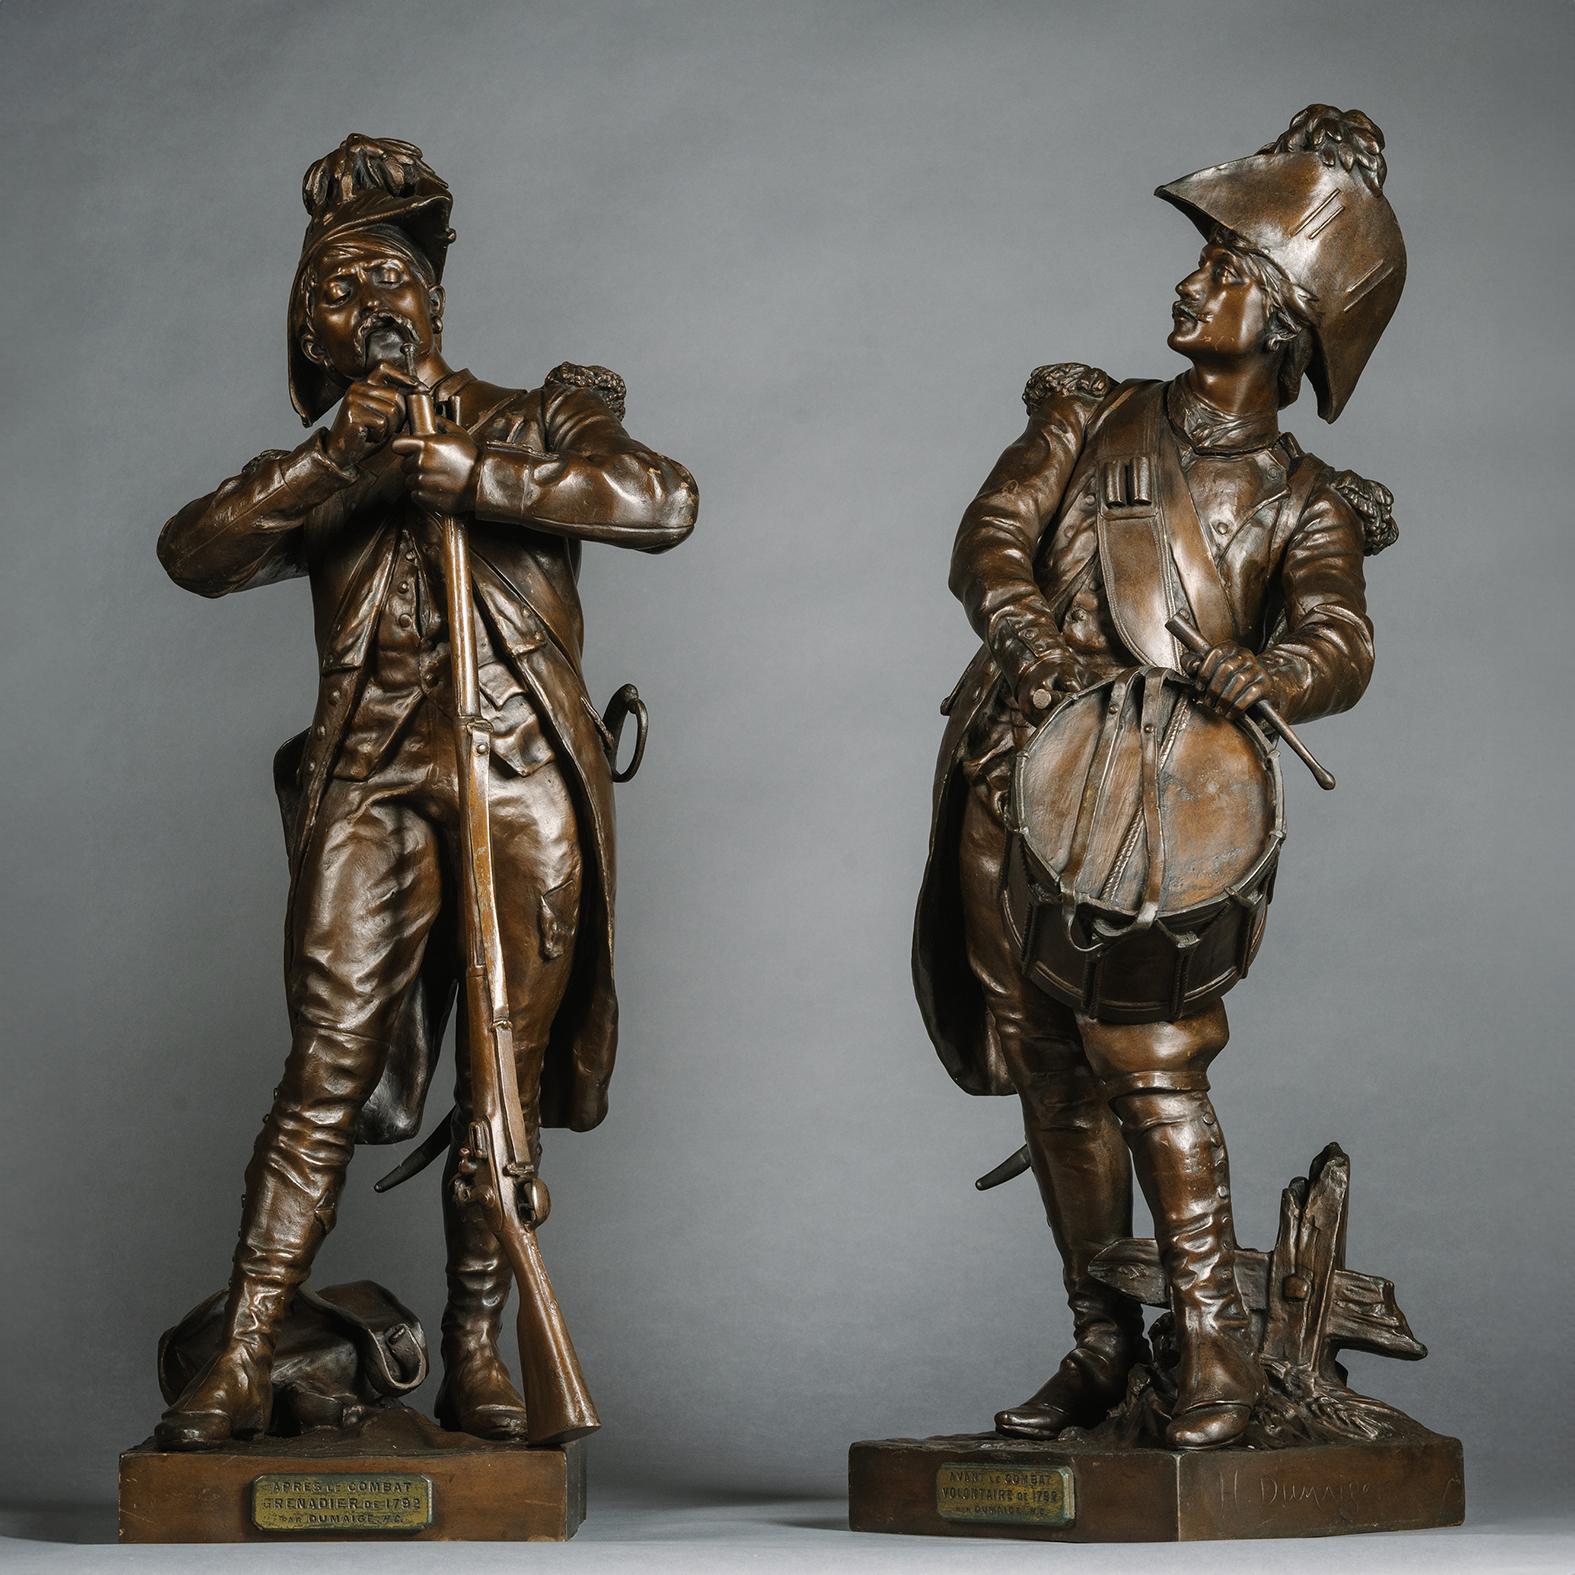 A Fine Pair of  Bronze Figures Entitled 'Avant le Combat' and 'Apres le Combat',  Cast from the models by Etienne-Henri Dumaige (1830 - 1888). 

Signed H. Dumaige, with title plaquettes.

The bronzes represent two separate moments in the French